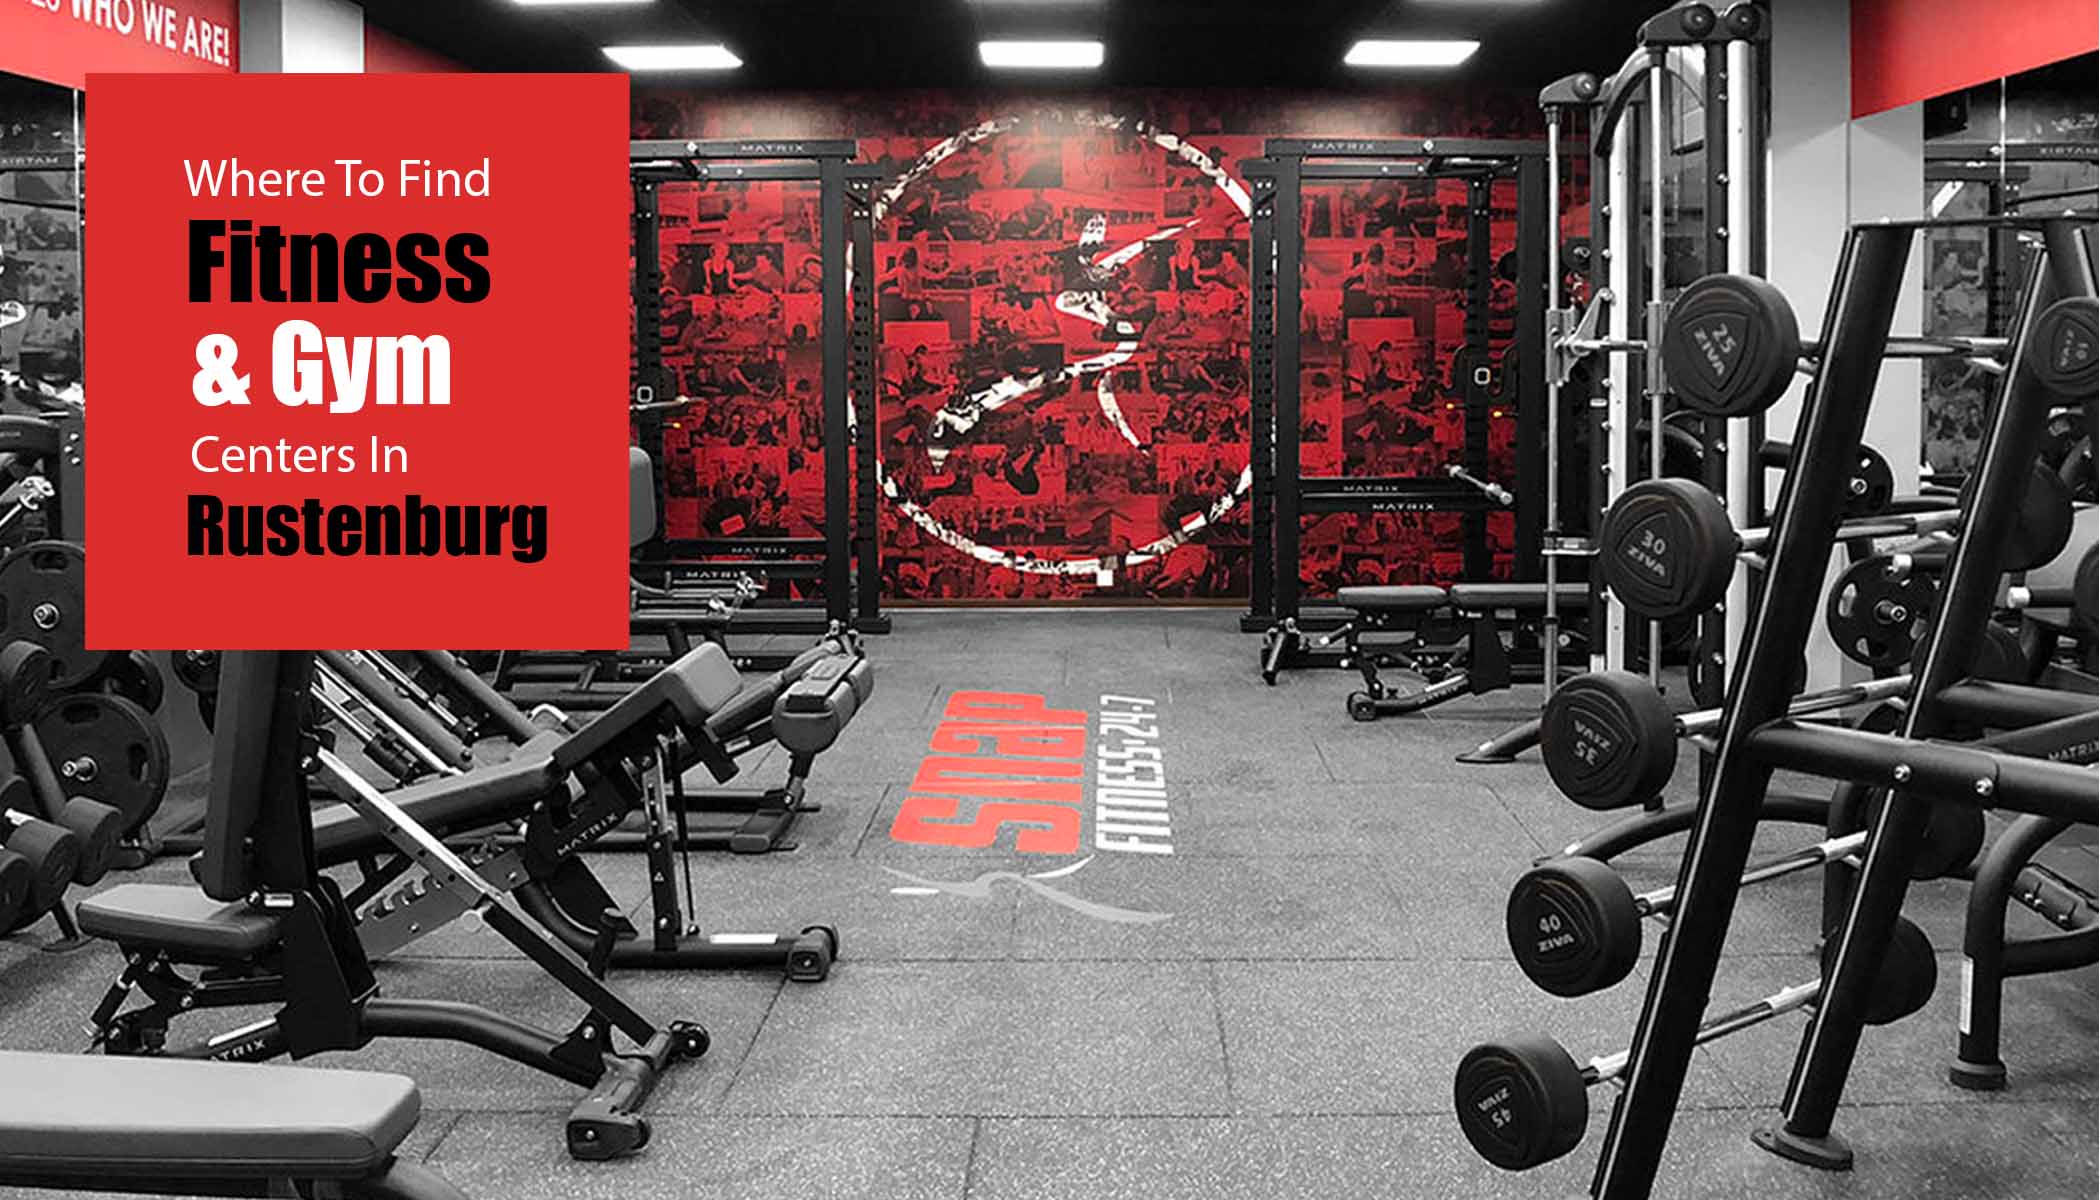 Where to Find Fitness and Gym Centers in Rustenburg